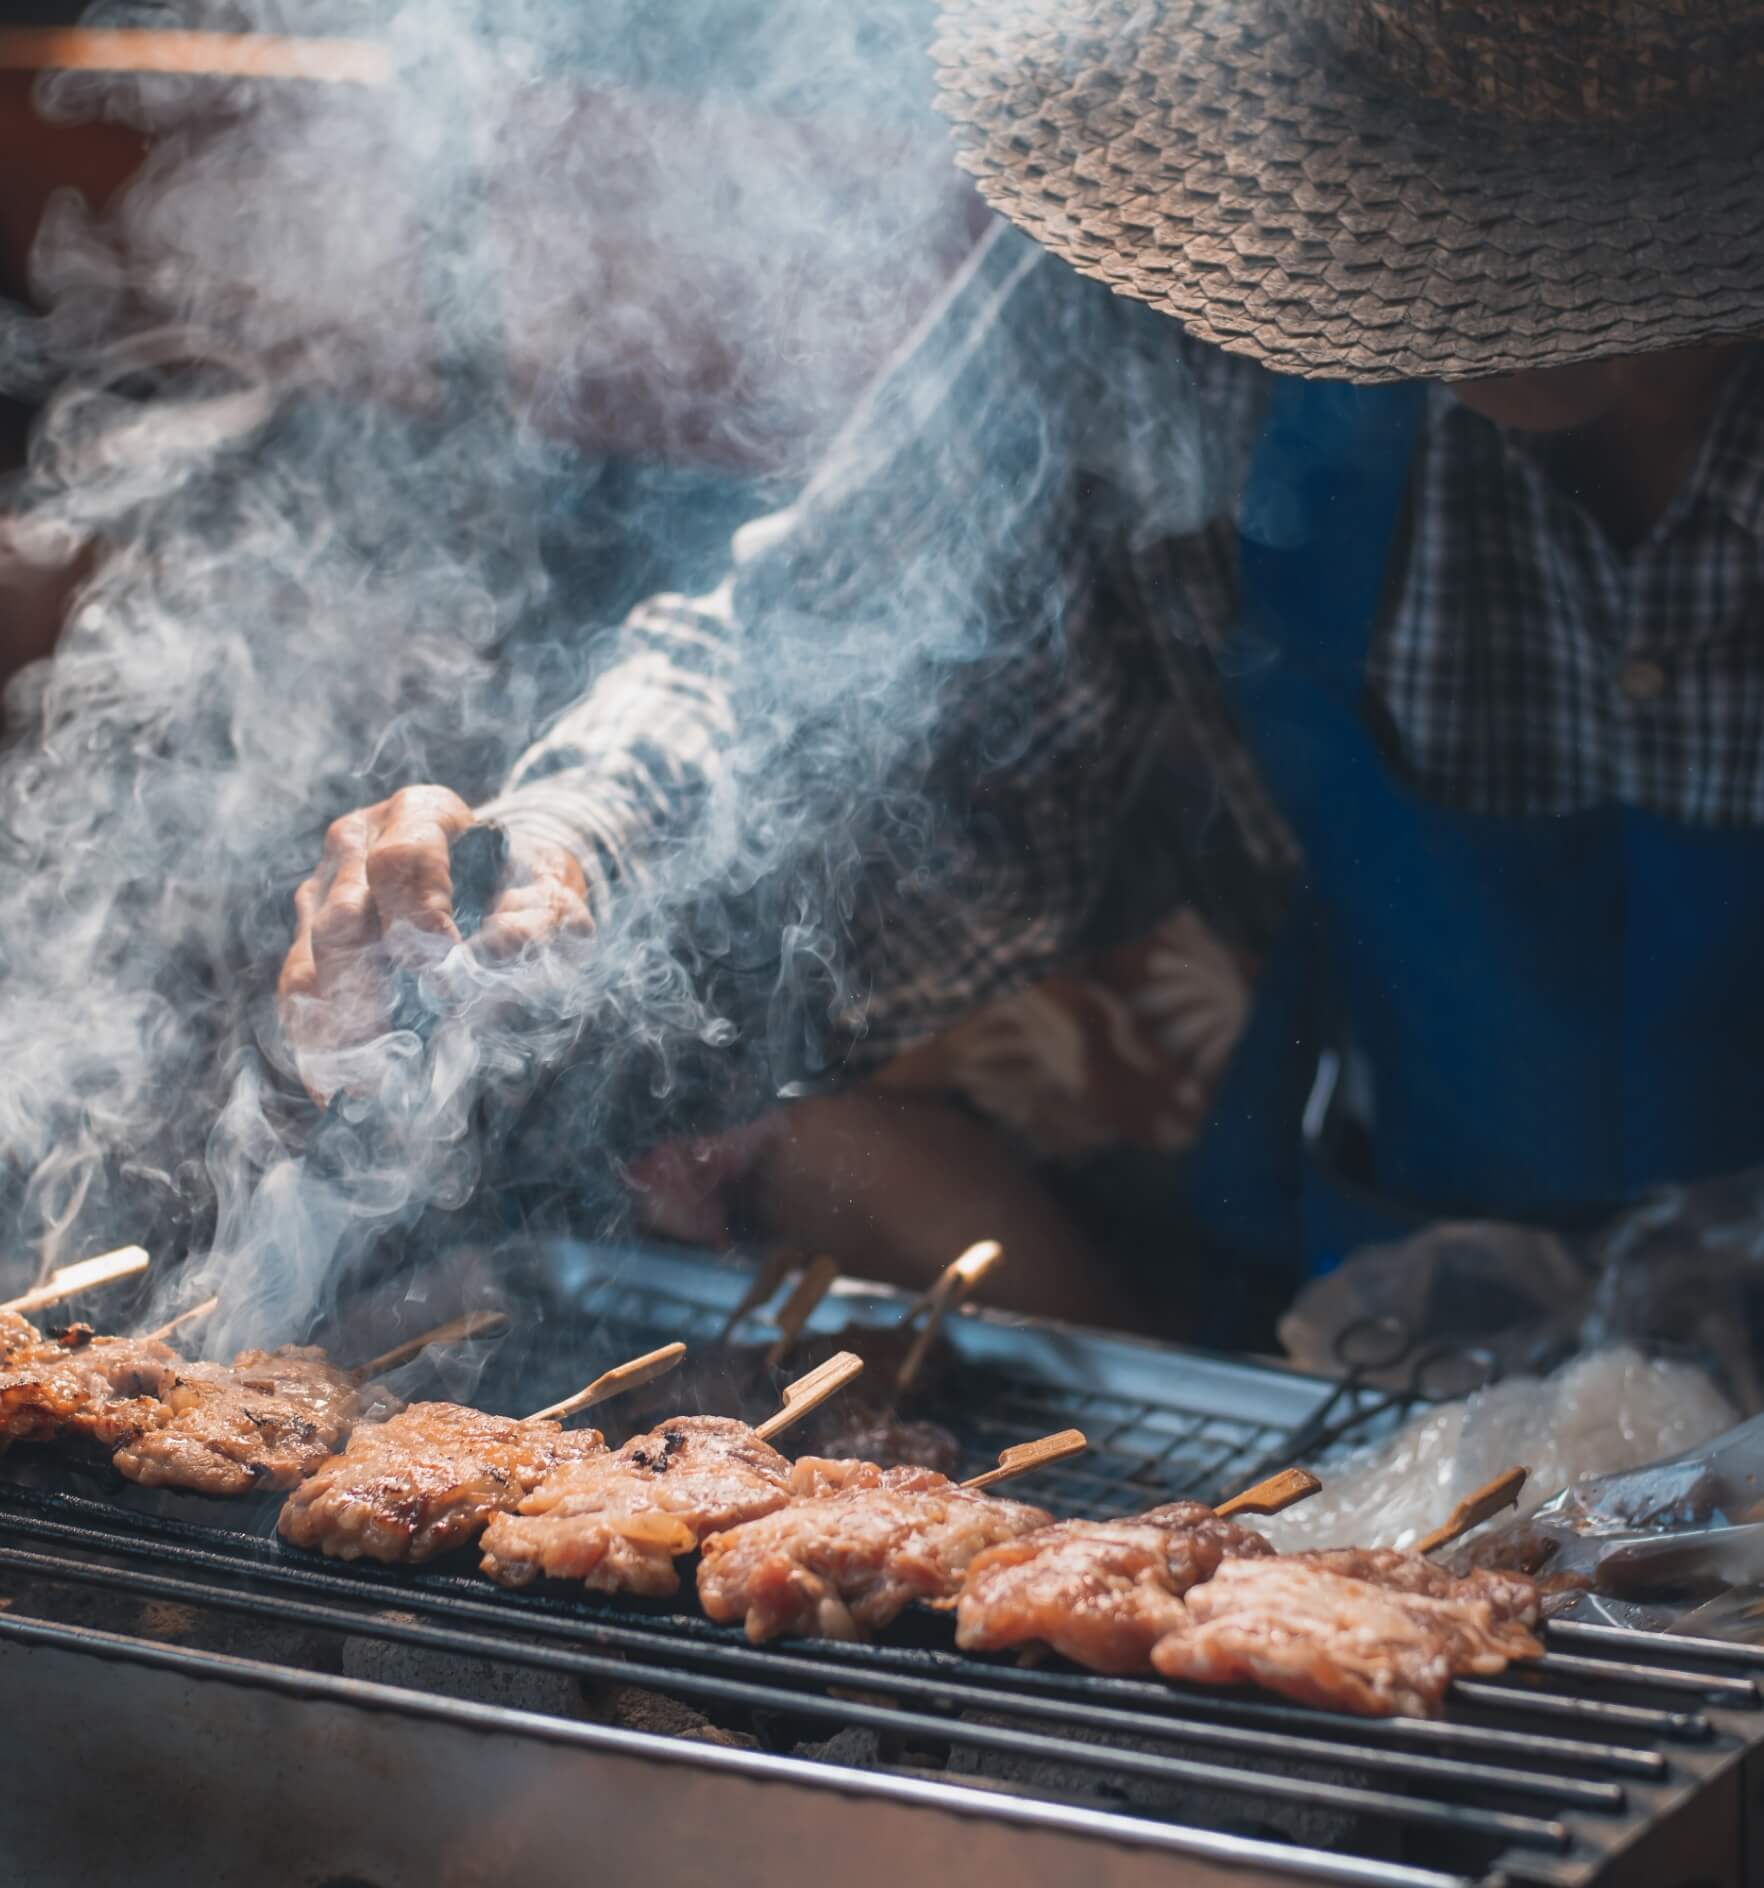 Image shows a man wearing a hat and grilling meat on sticks